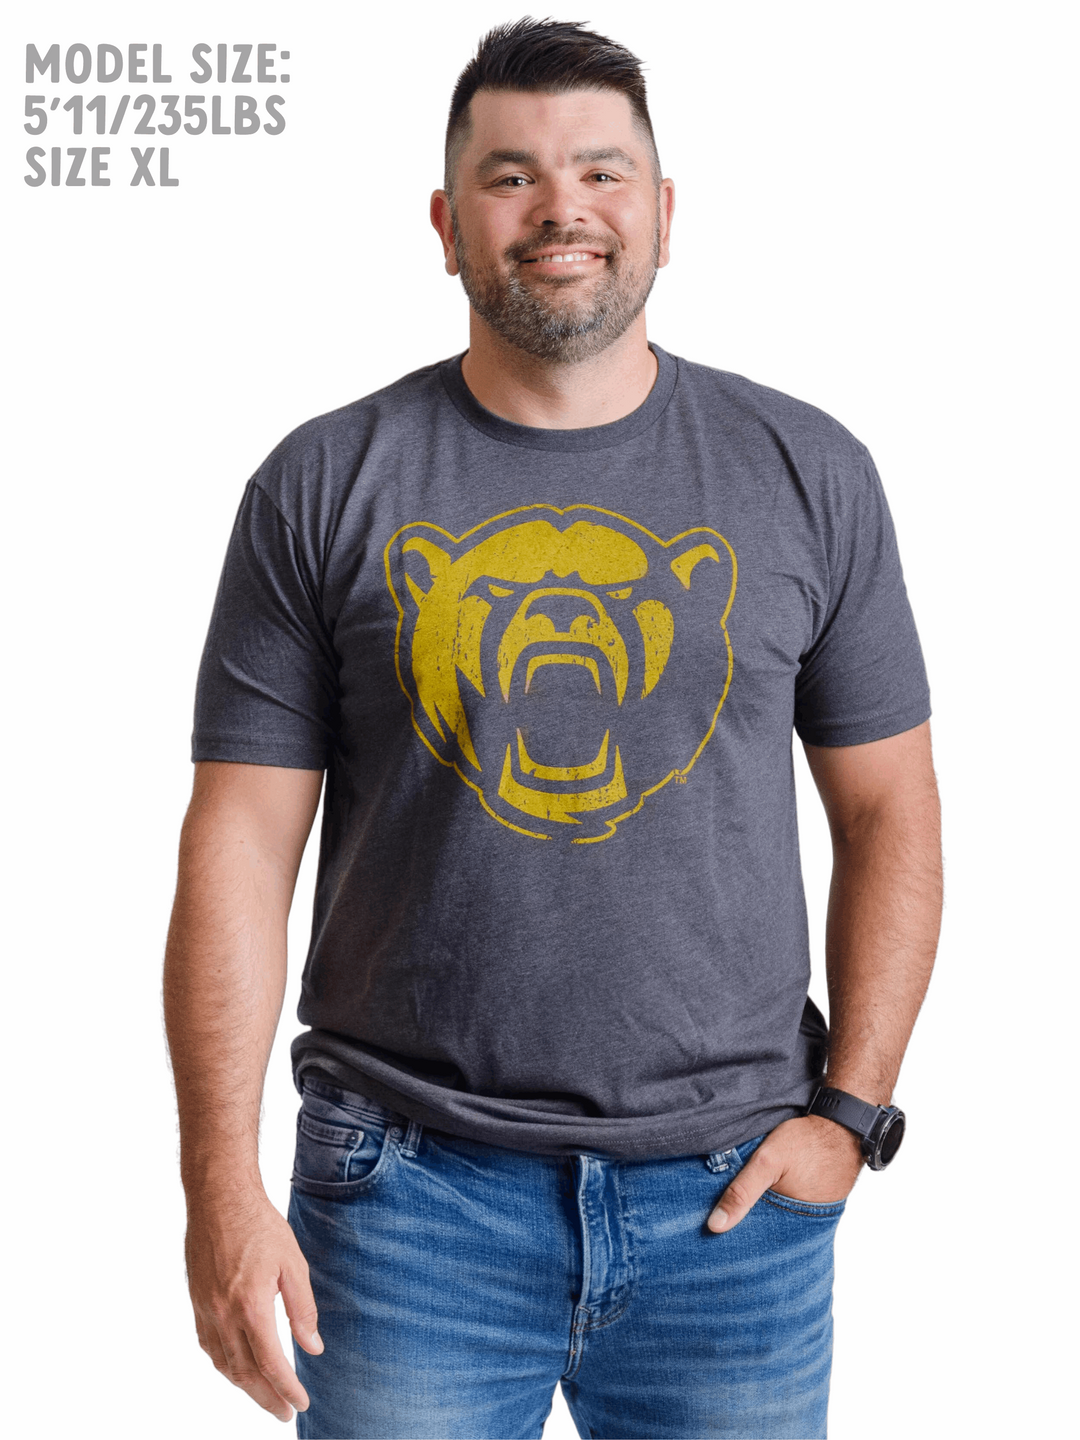 Baylor University Bear Head T-Shirt with Model Size and Weight